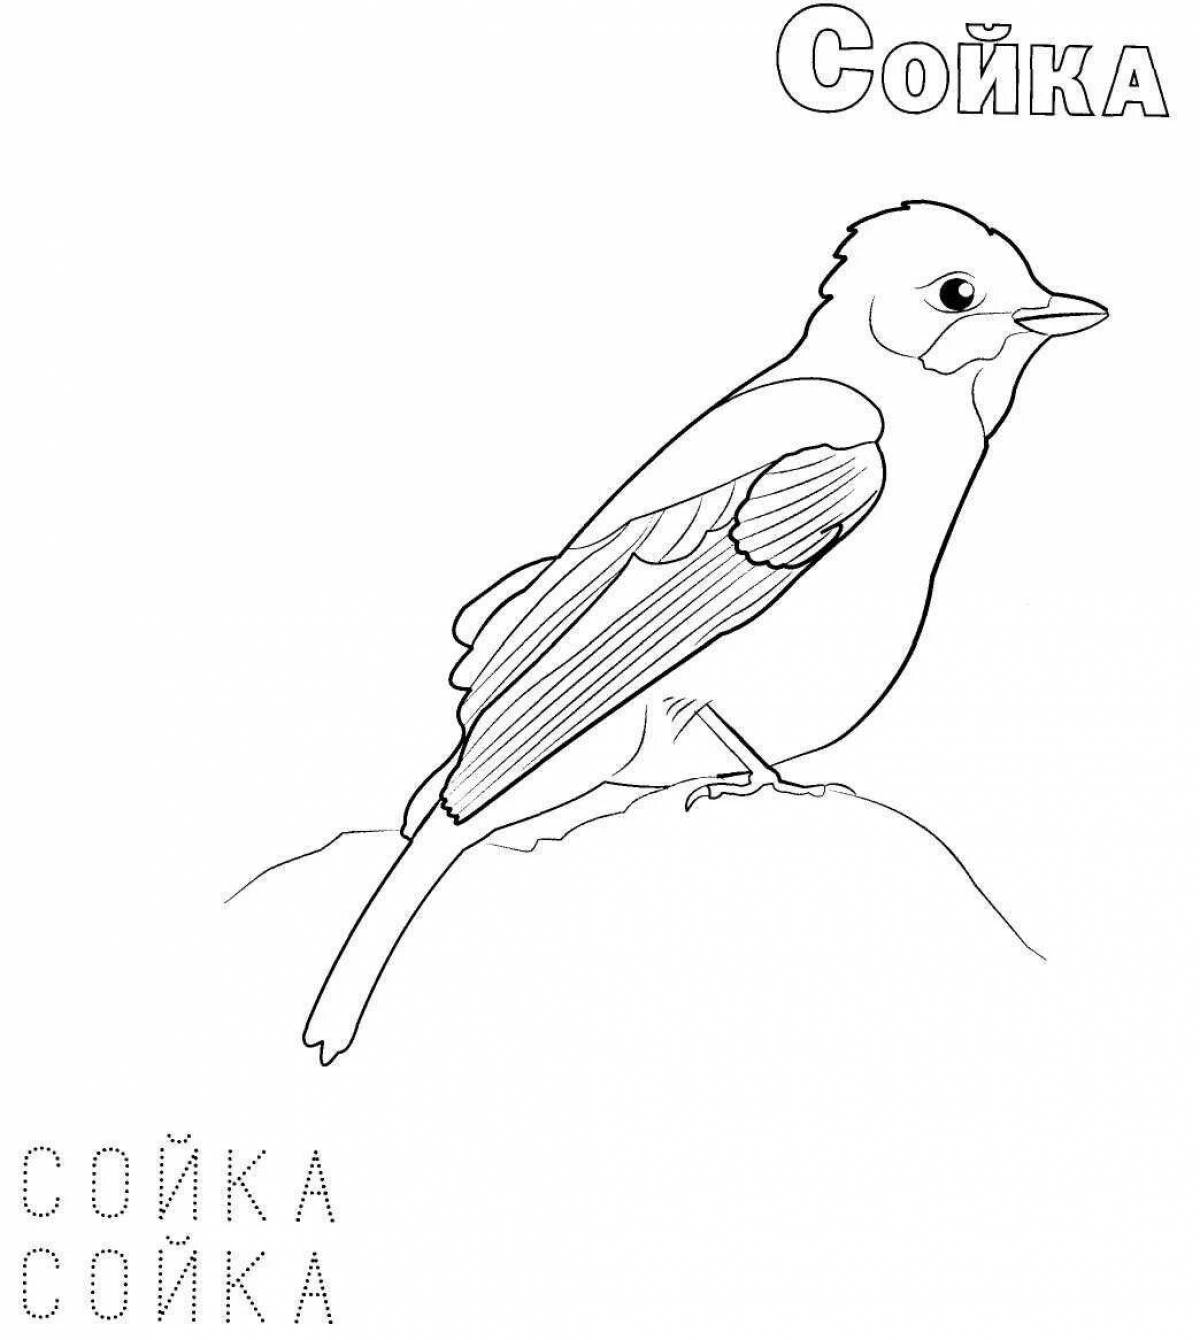 Wonderful wintering birds coloring pages for kids